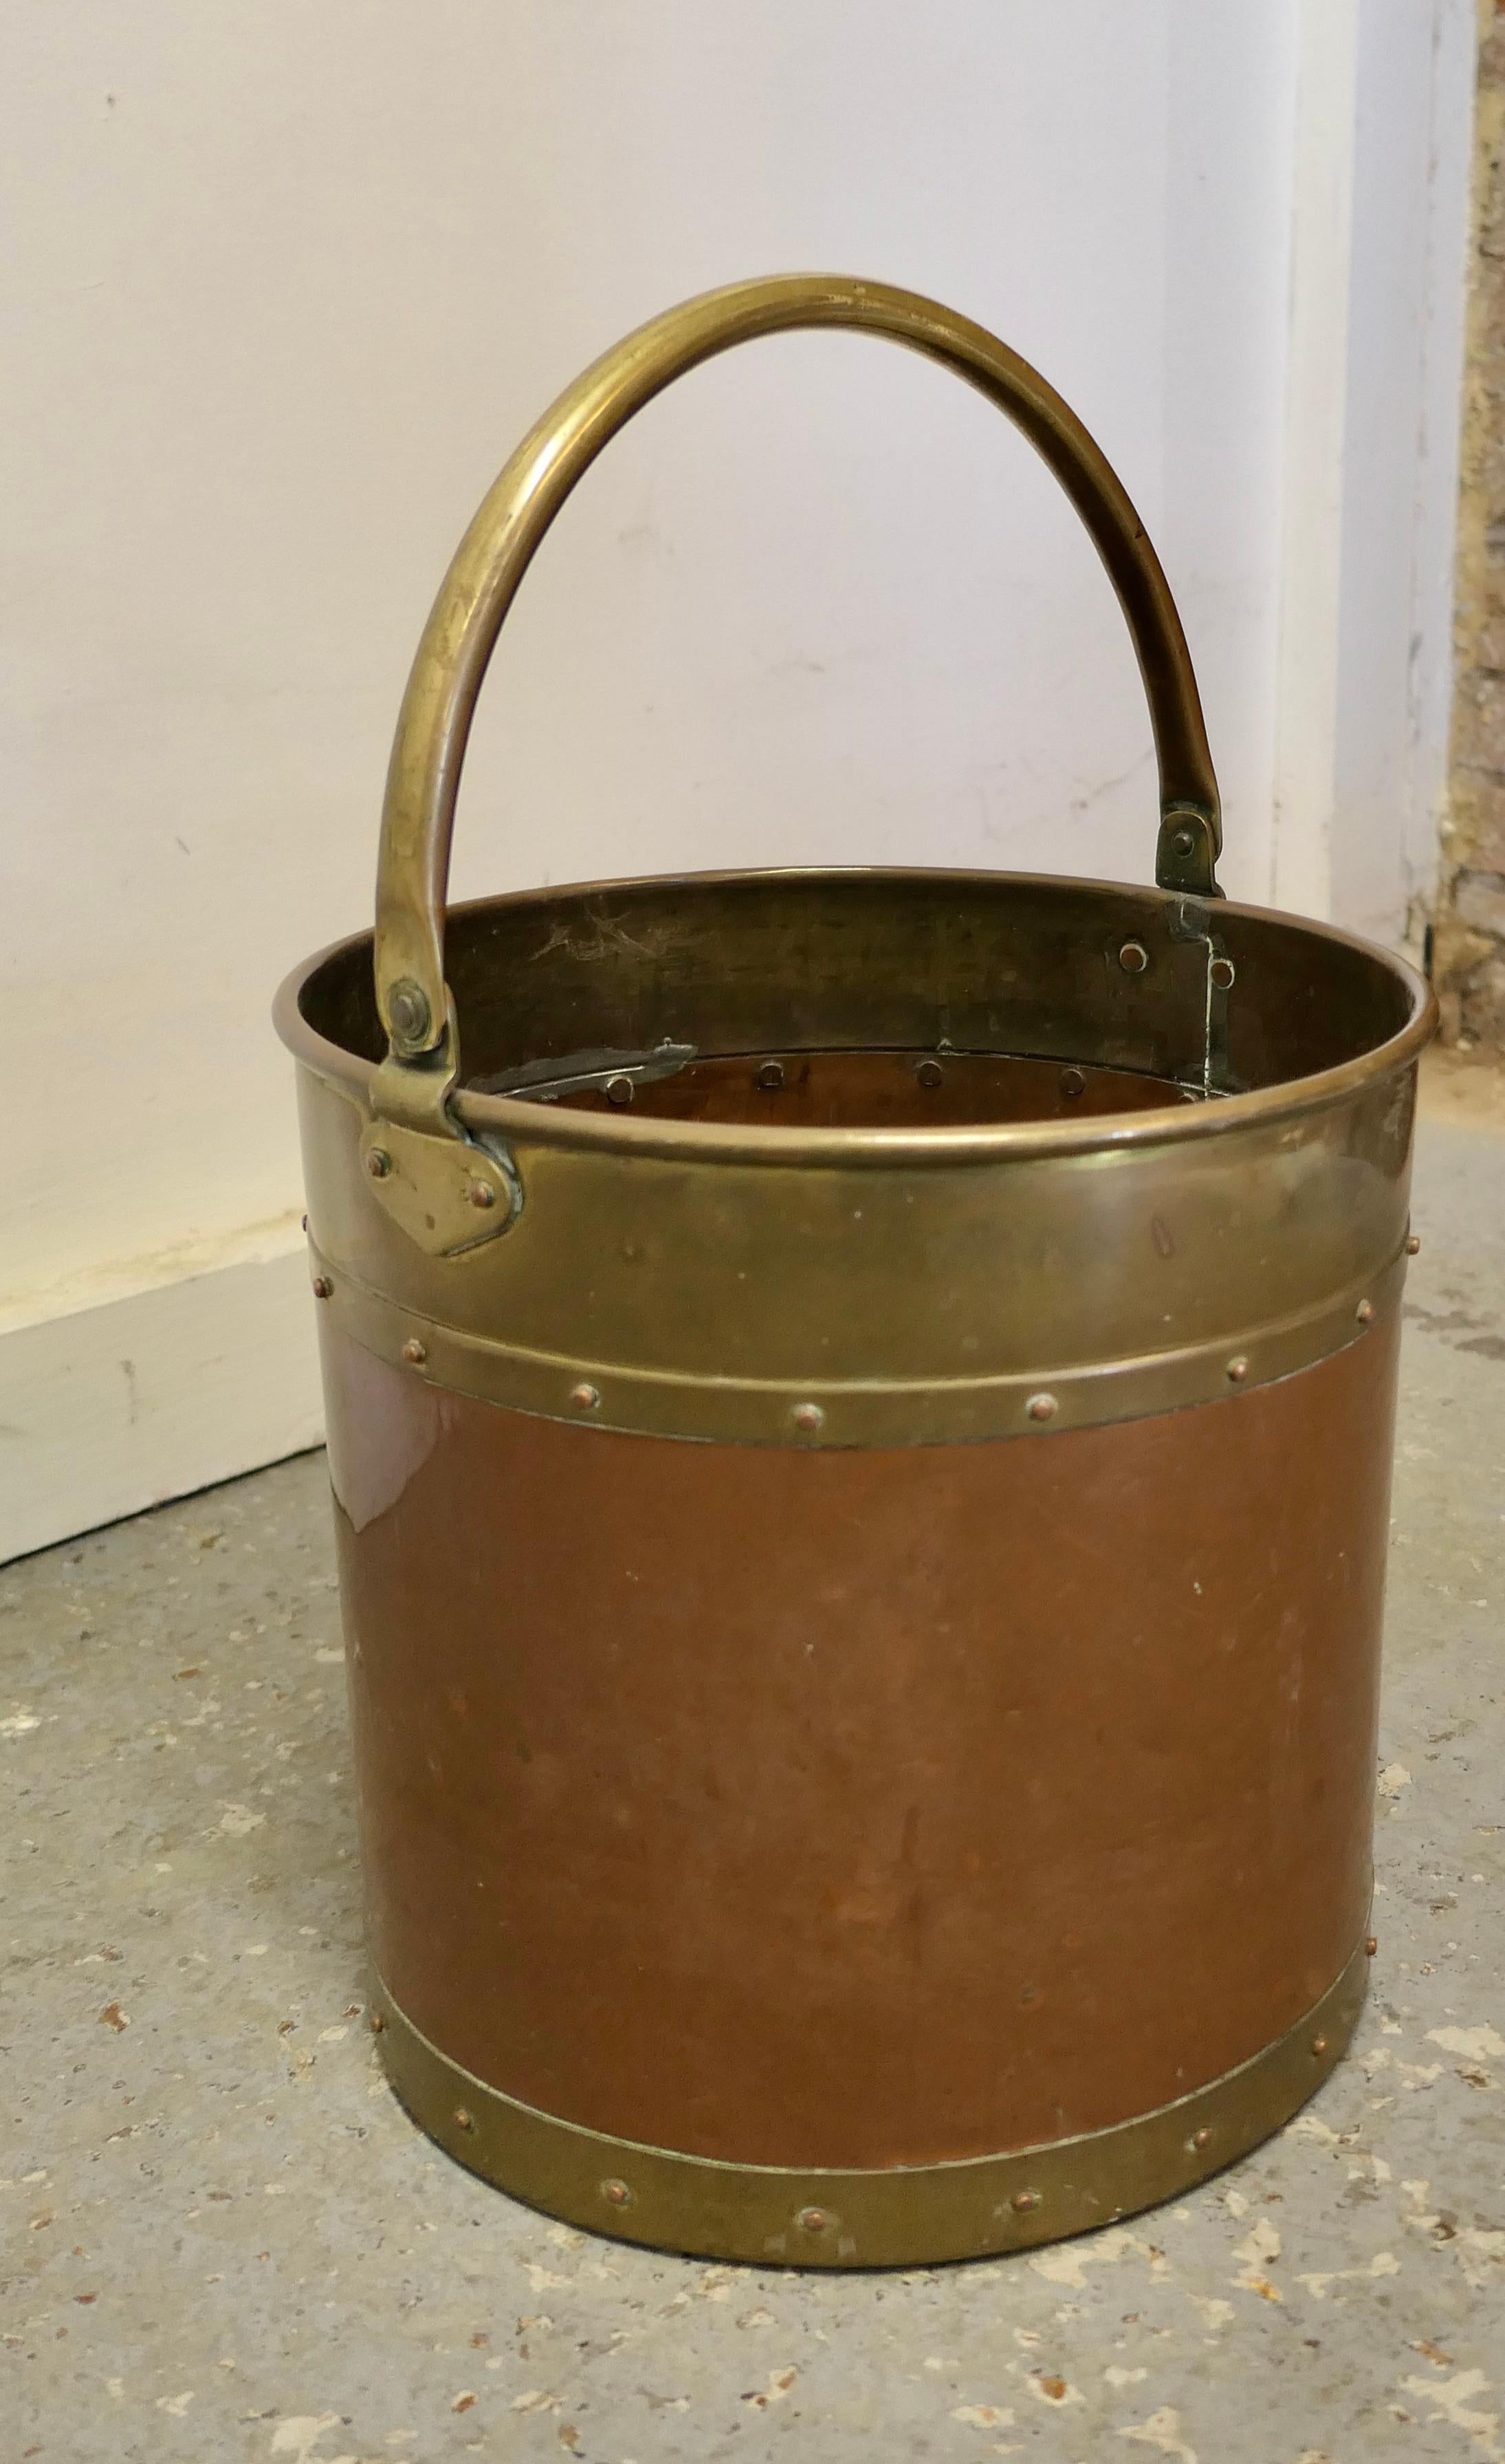 Riveted copper and brass coal bucket.

This is a lovely strong copper coal bucket, this is a good big piece and would make a really good coal or log container and handy because it has a riveted brass carrying handle.

The bucket is in good well